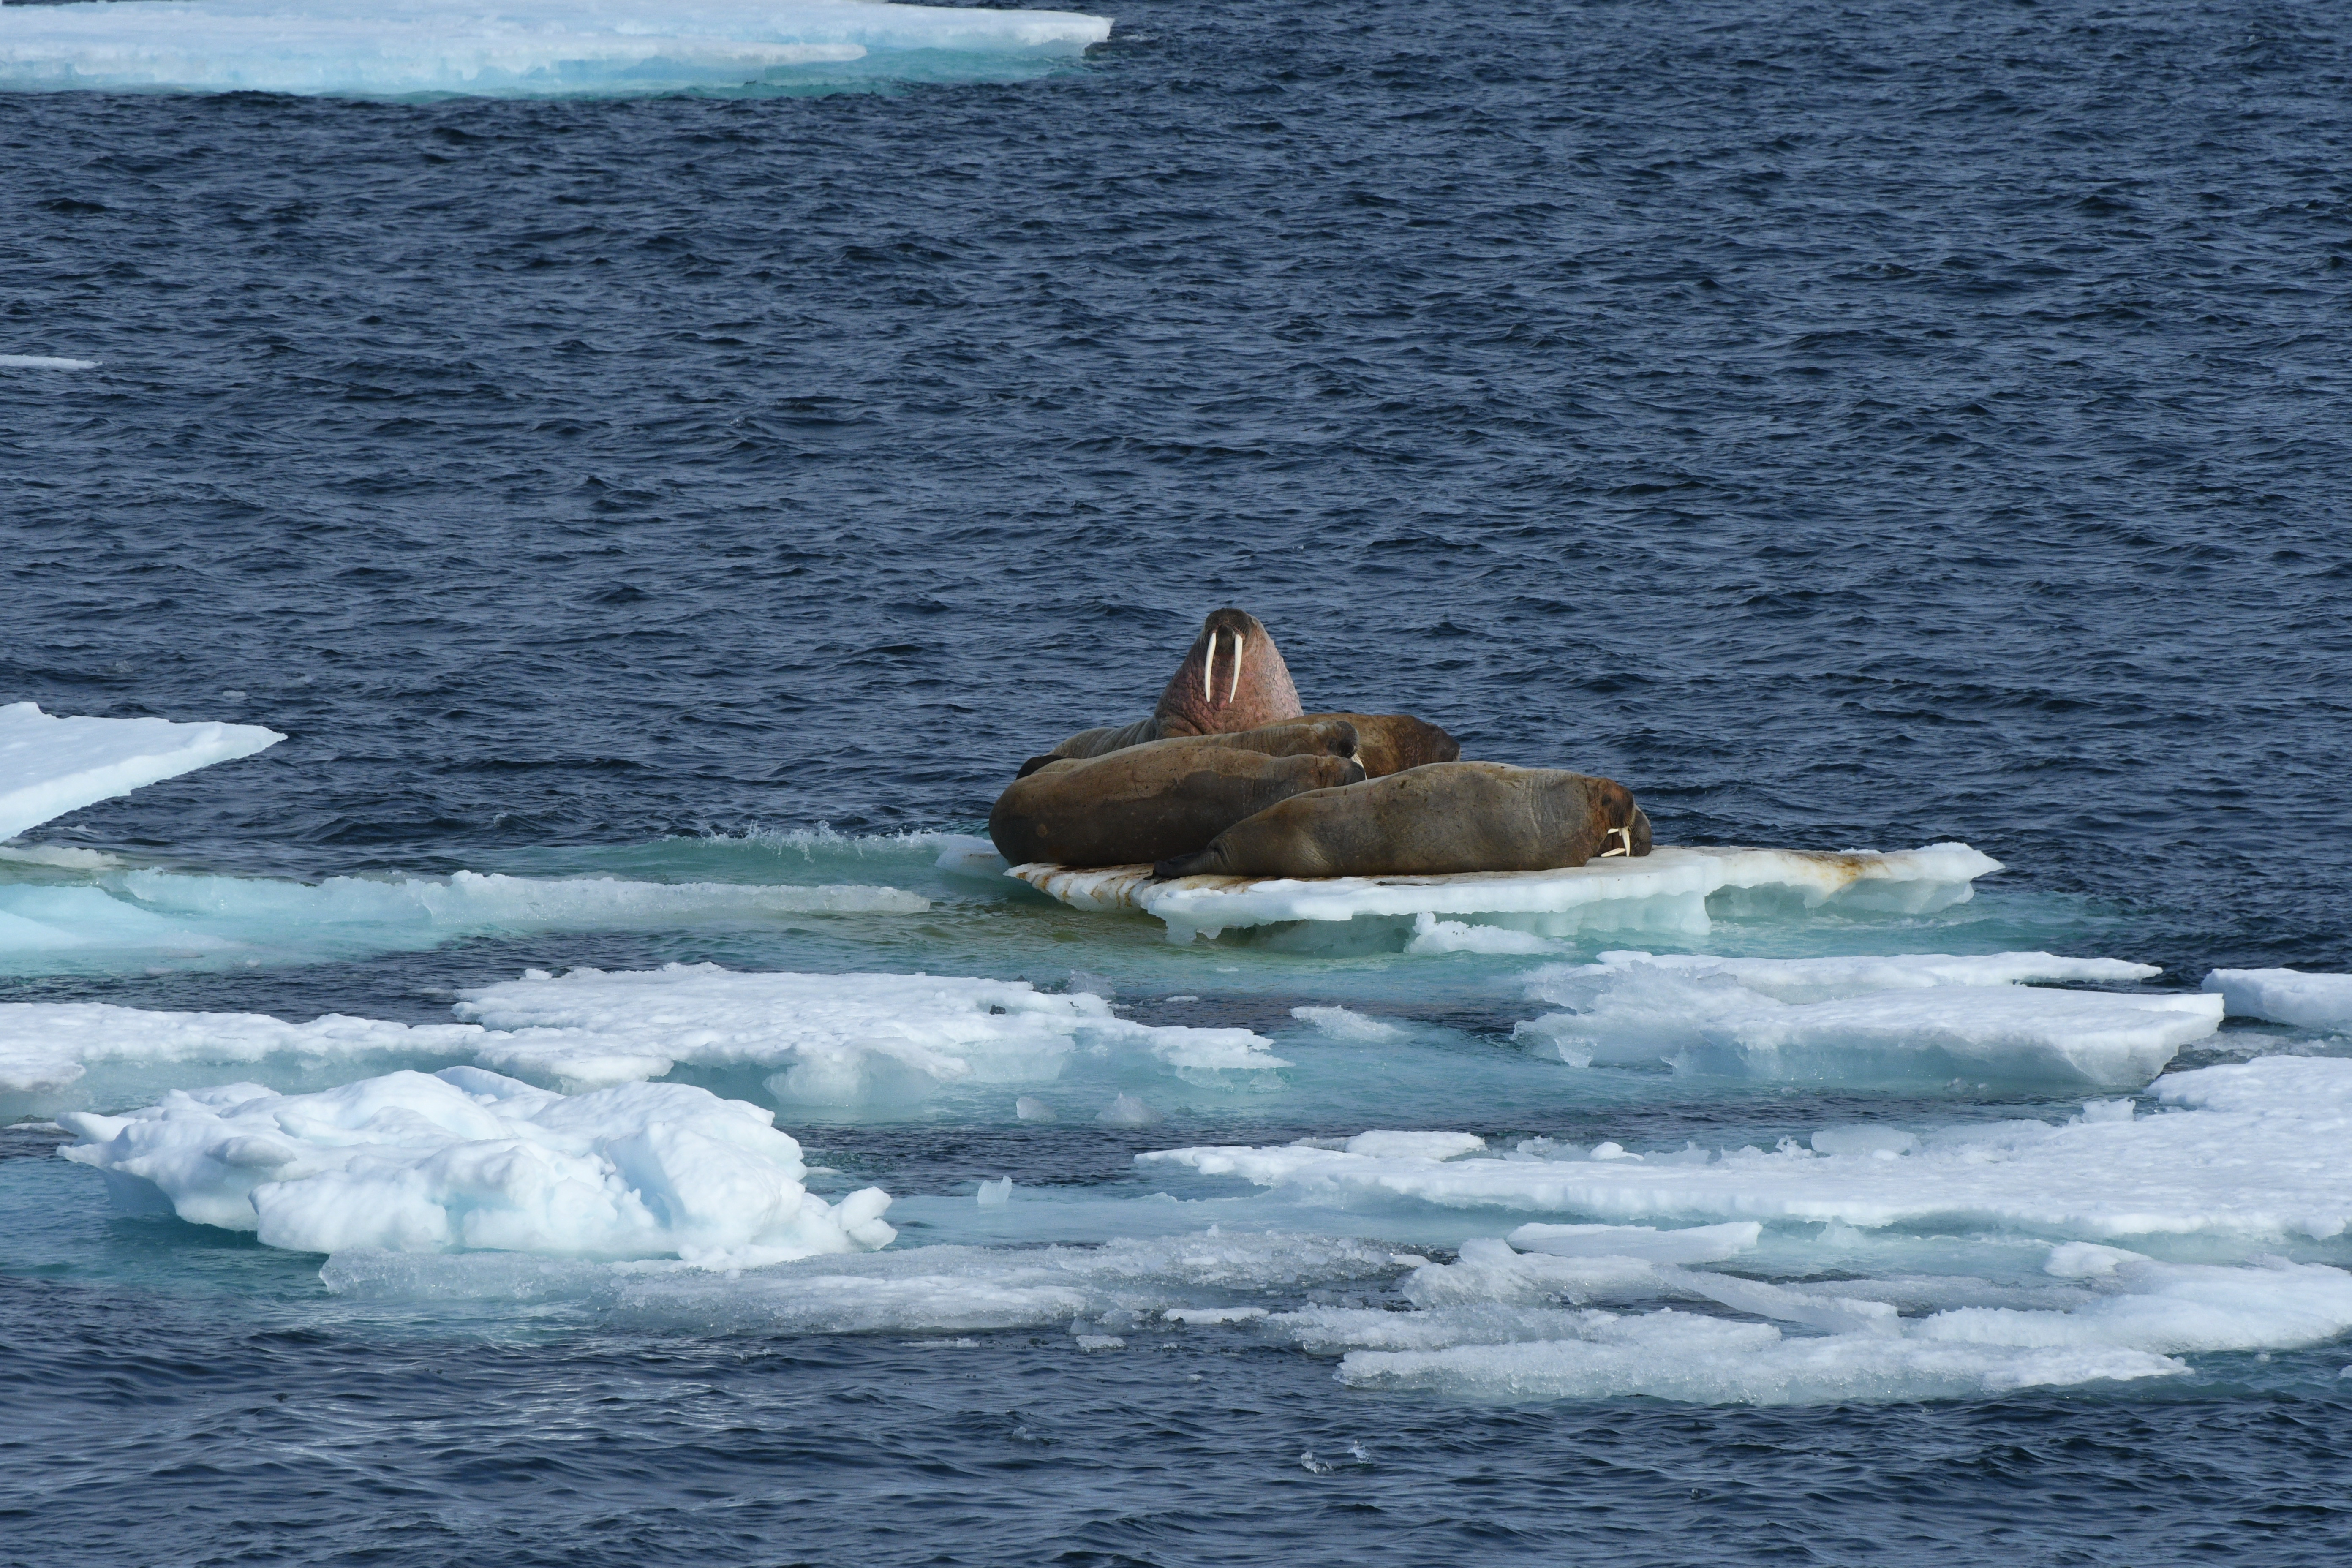 A huddle of walrus bask in the sun on the pack ice in at the far northern edge of the Arctic, near the 79th parallel north. Photo: Alcia-Rae Olafsson